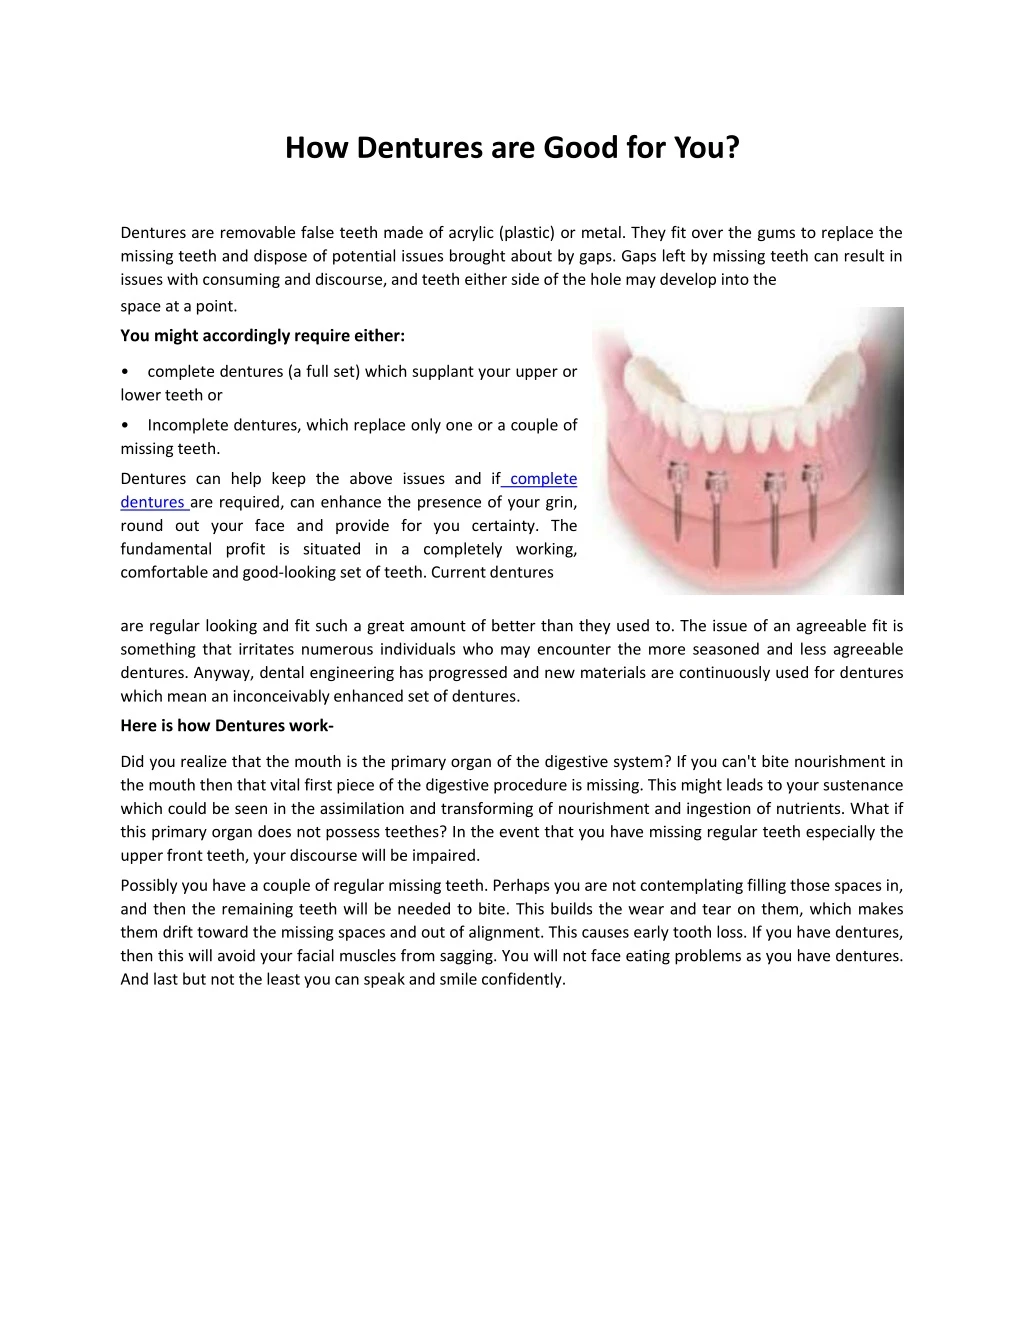 how dentures are good for you